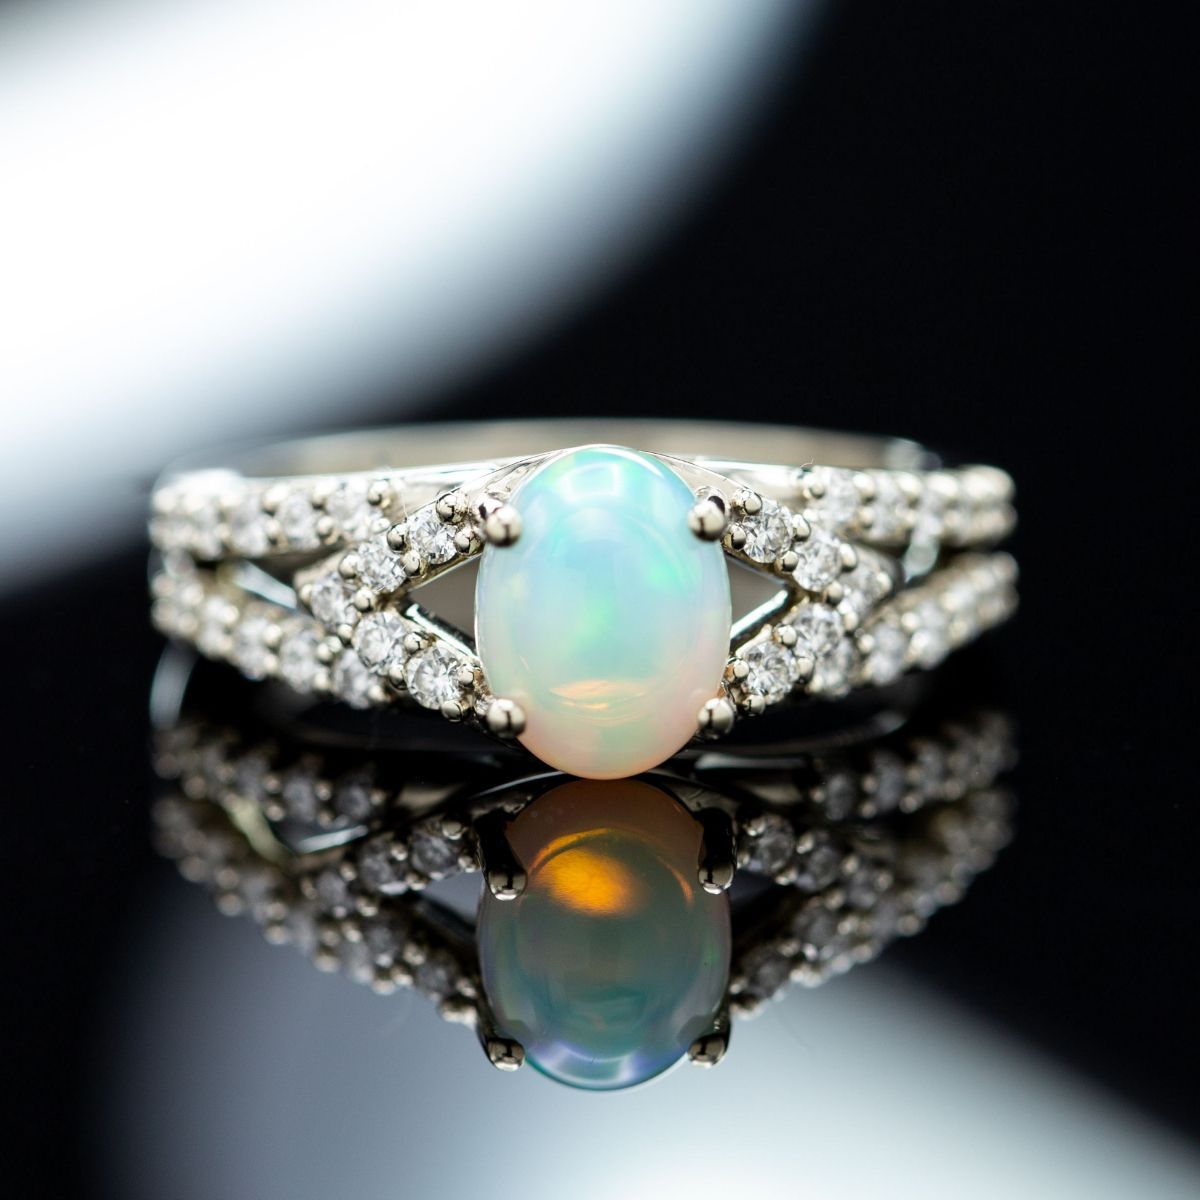 Opal Engagement Rings | Custommade Inside Oval Opal Rings With Diamond Side Accents (View 19 of 25)